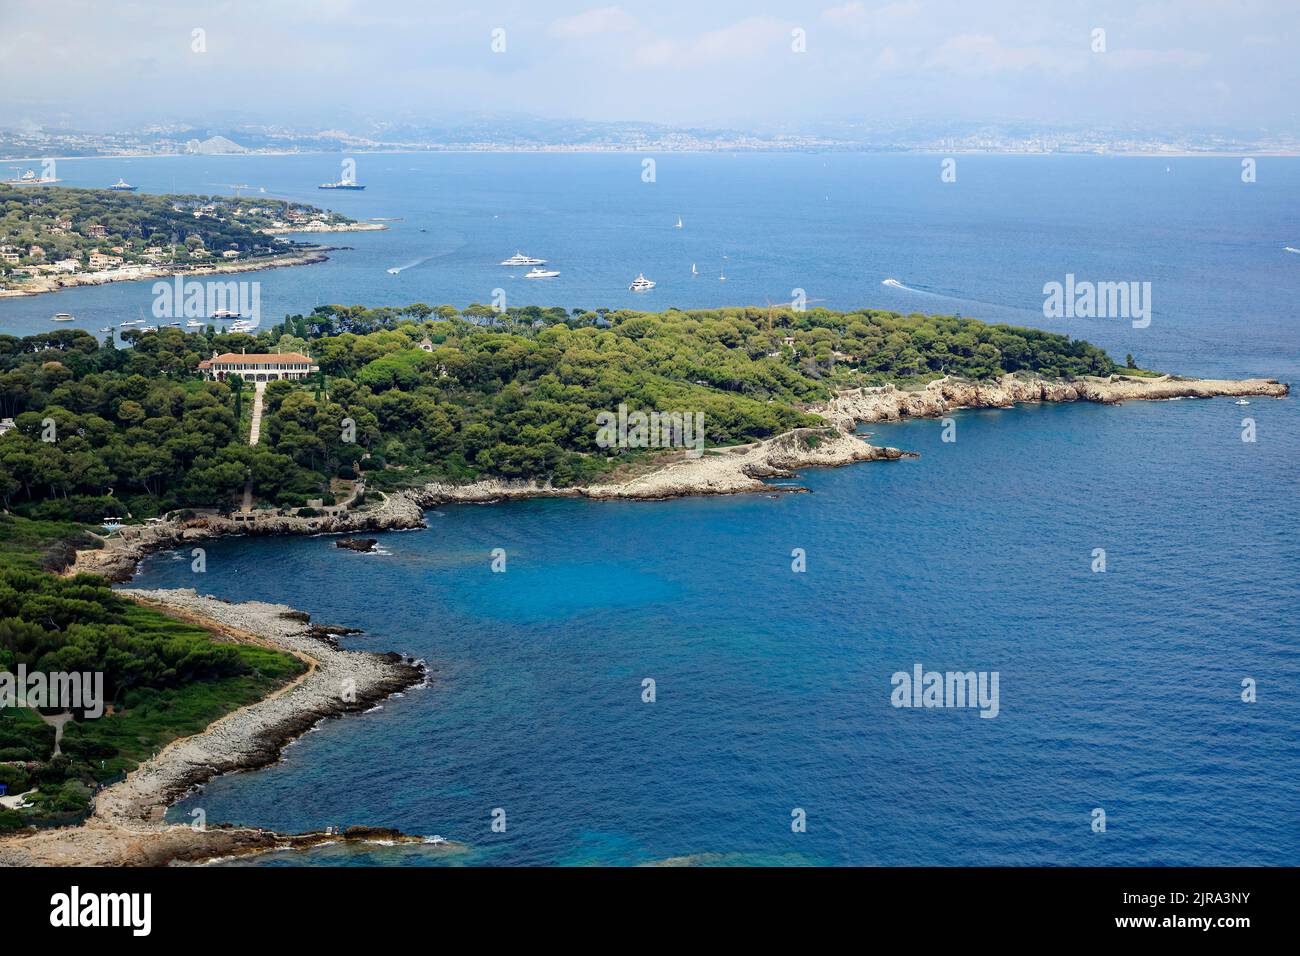 Antibes (south-eastern France): aerial view of the Peninsula of Antibes with the pine forest and the Castle of Garoupe Stock Photo